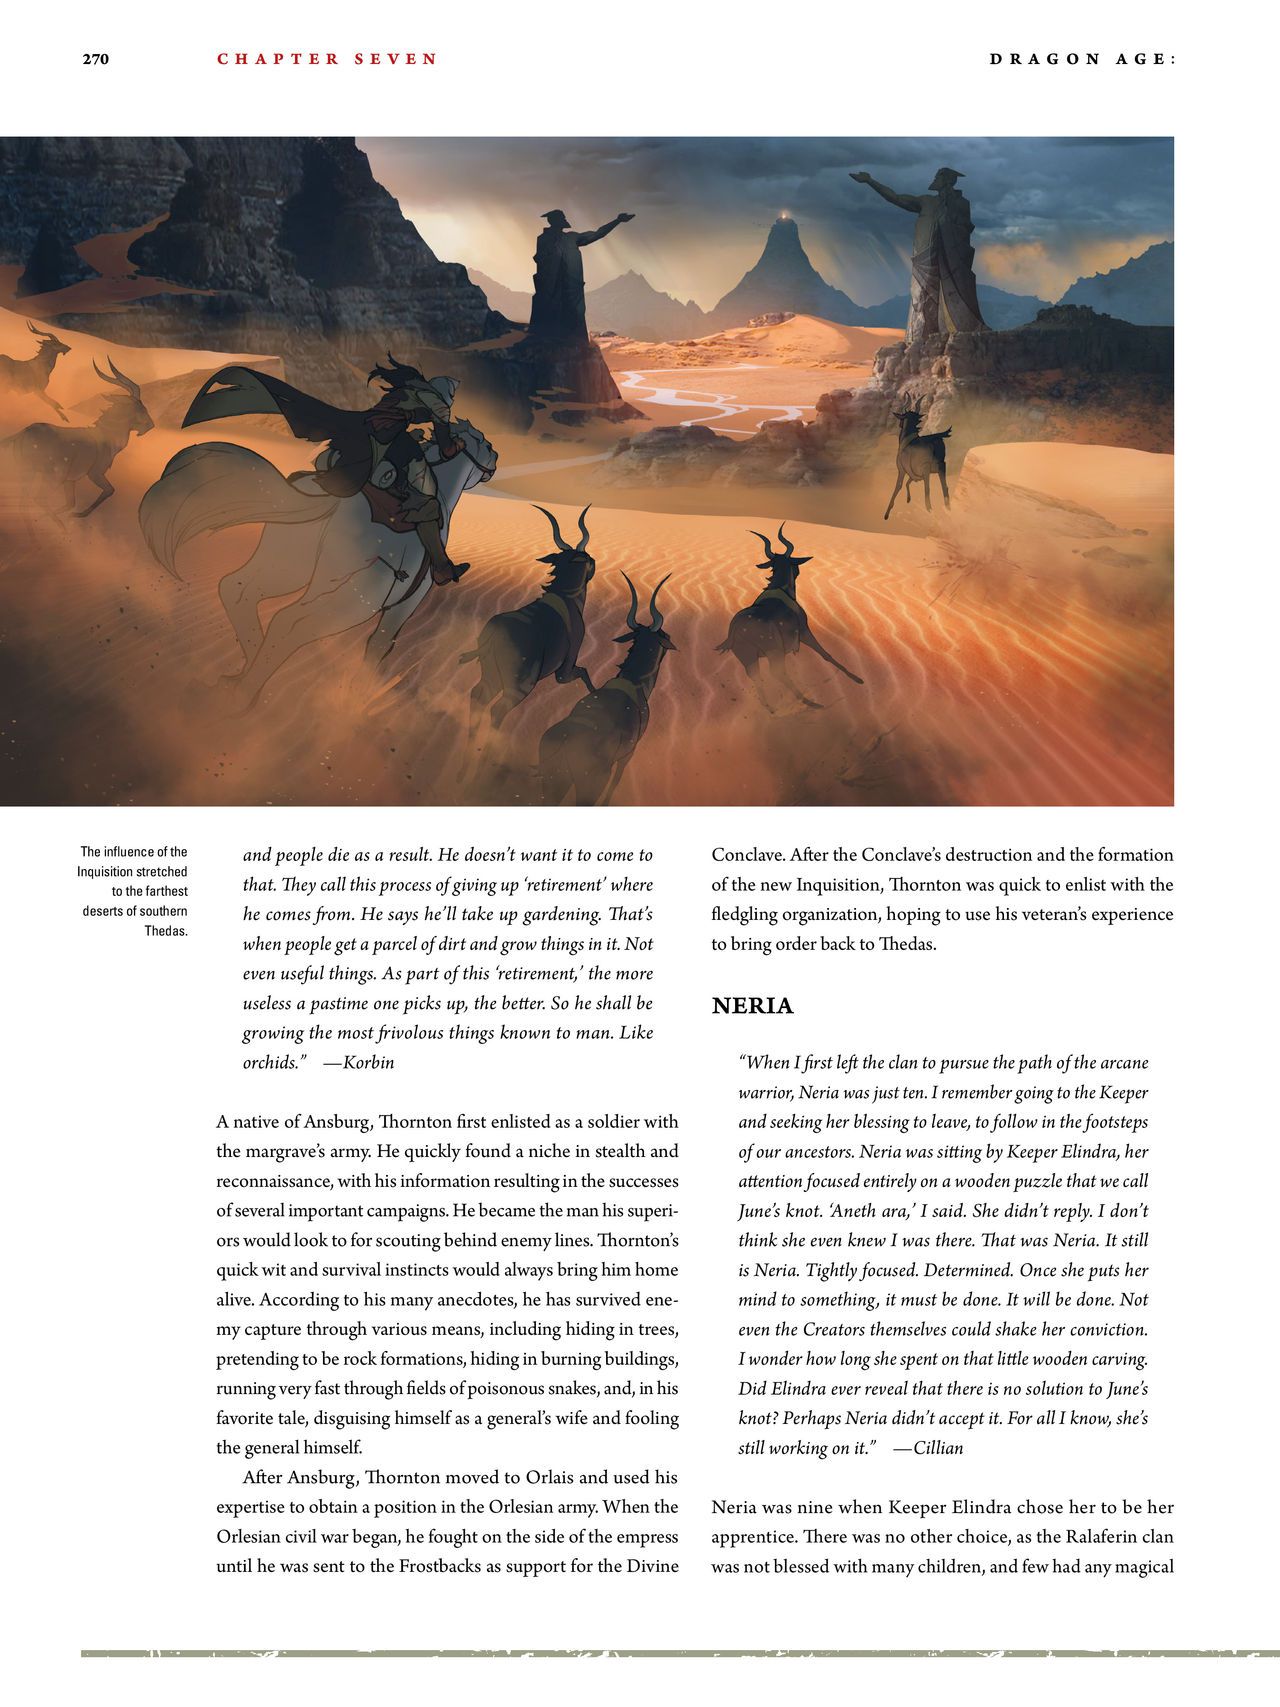 Dragon Age - The World of Thedas v02 262